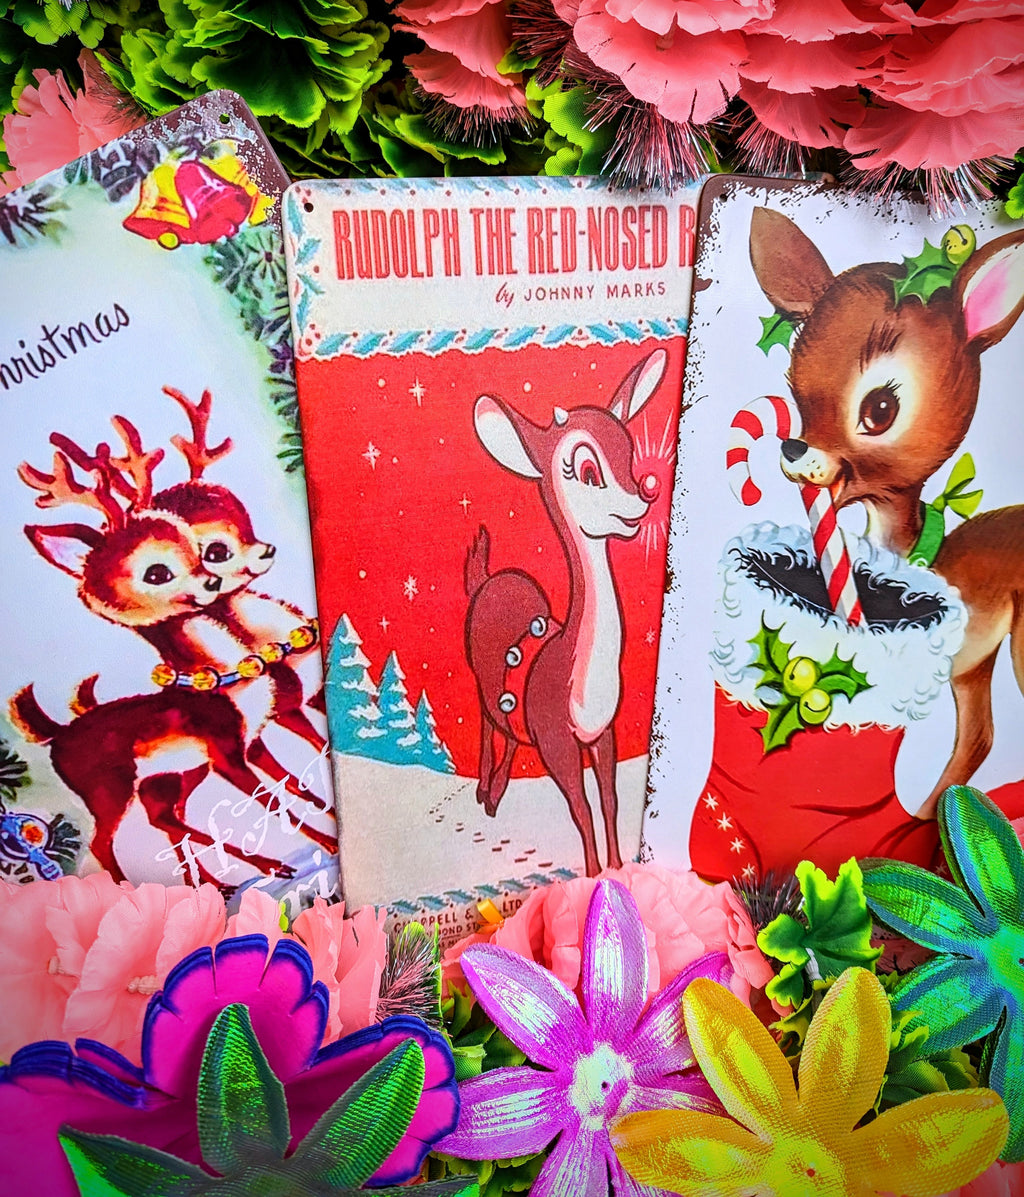 Hang these delights on your front door or festive display!

Vintage illustrations of Bambi Rudolph's are our fave childrens book images

Great up on the wall or even tile behind a sink or cooker with them for a bit of eye joy!!

20x30cm

Printed tin

Not original vintage.

Bambi xmas joy tin sign